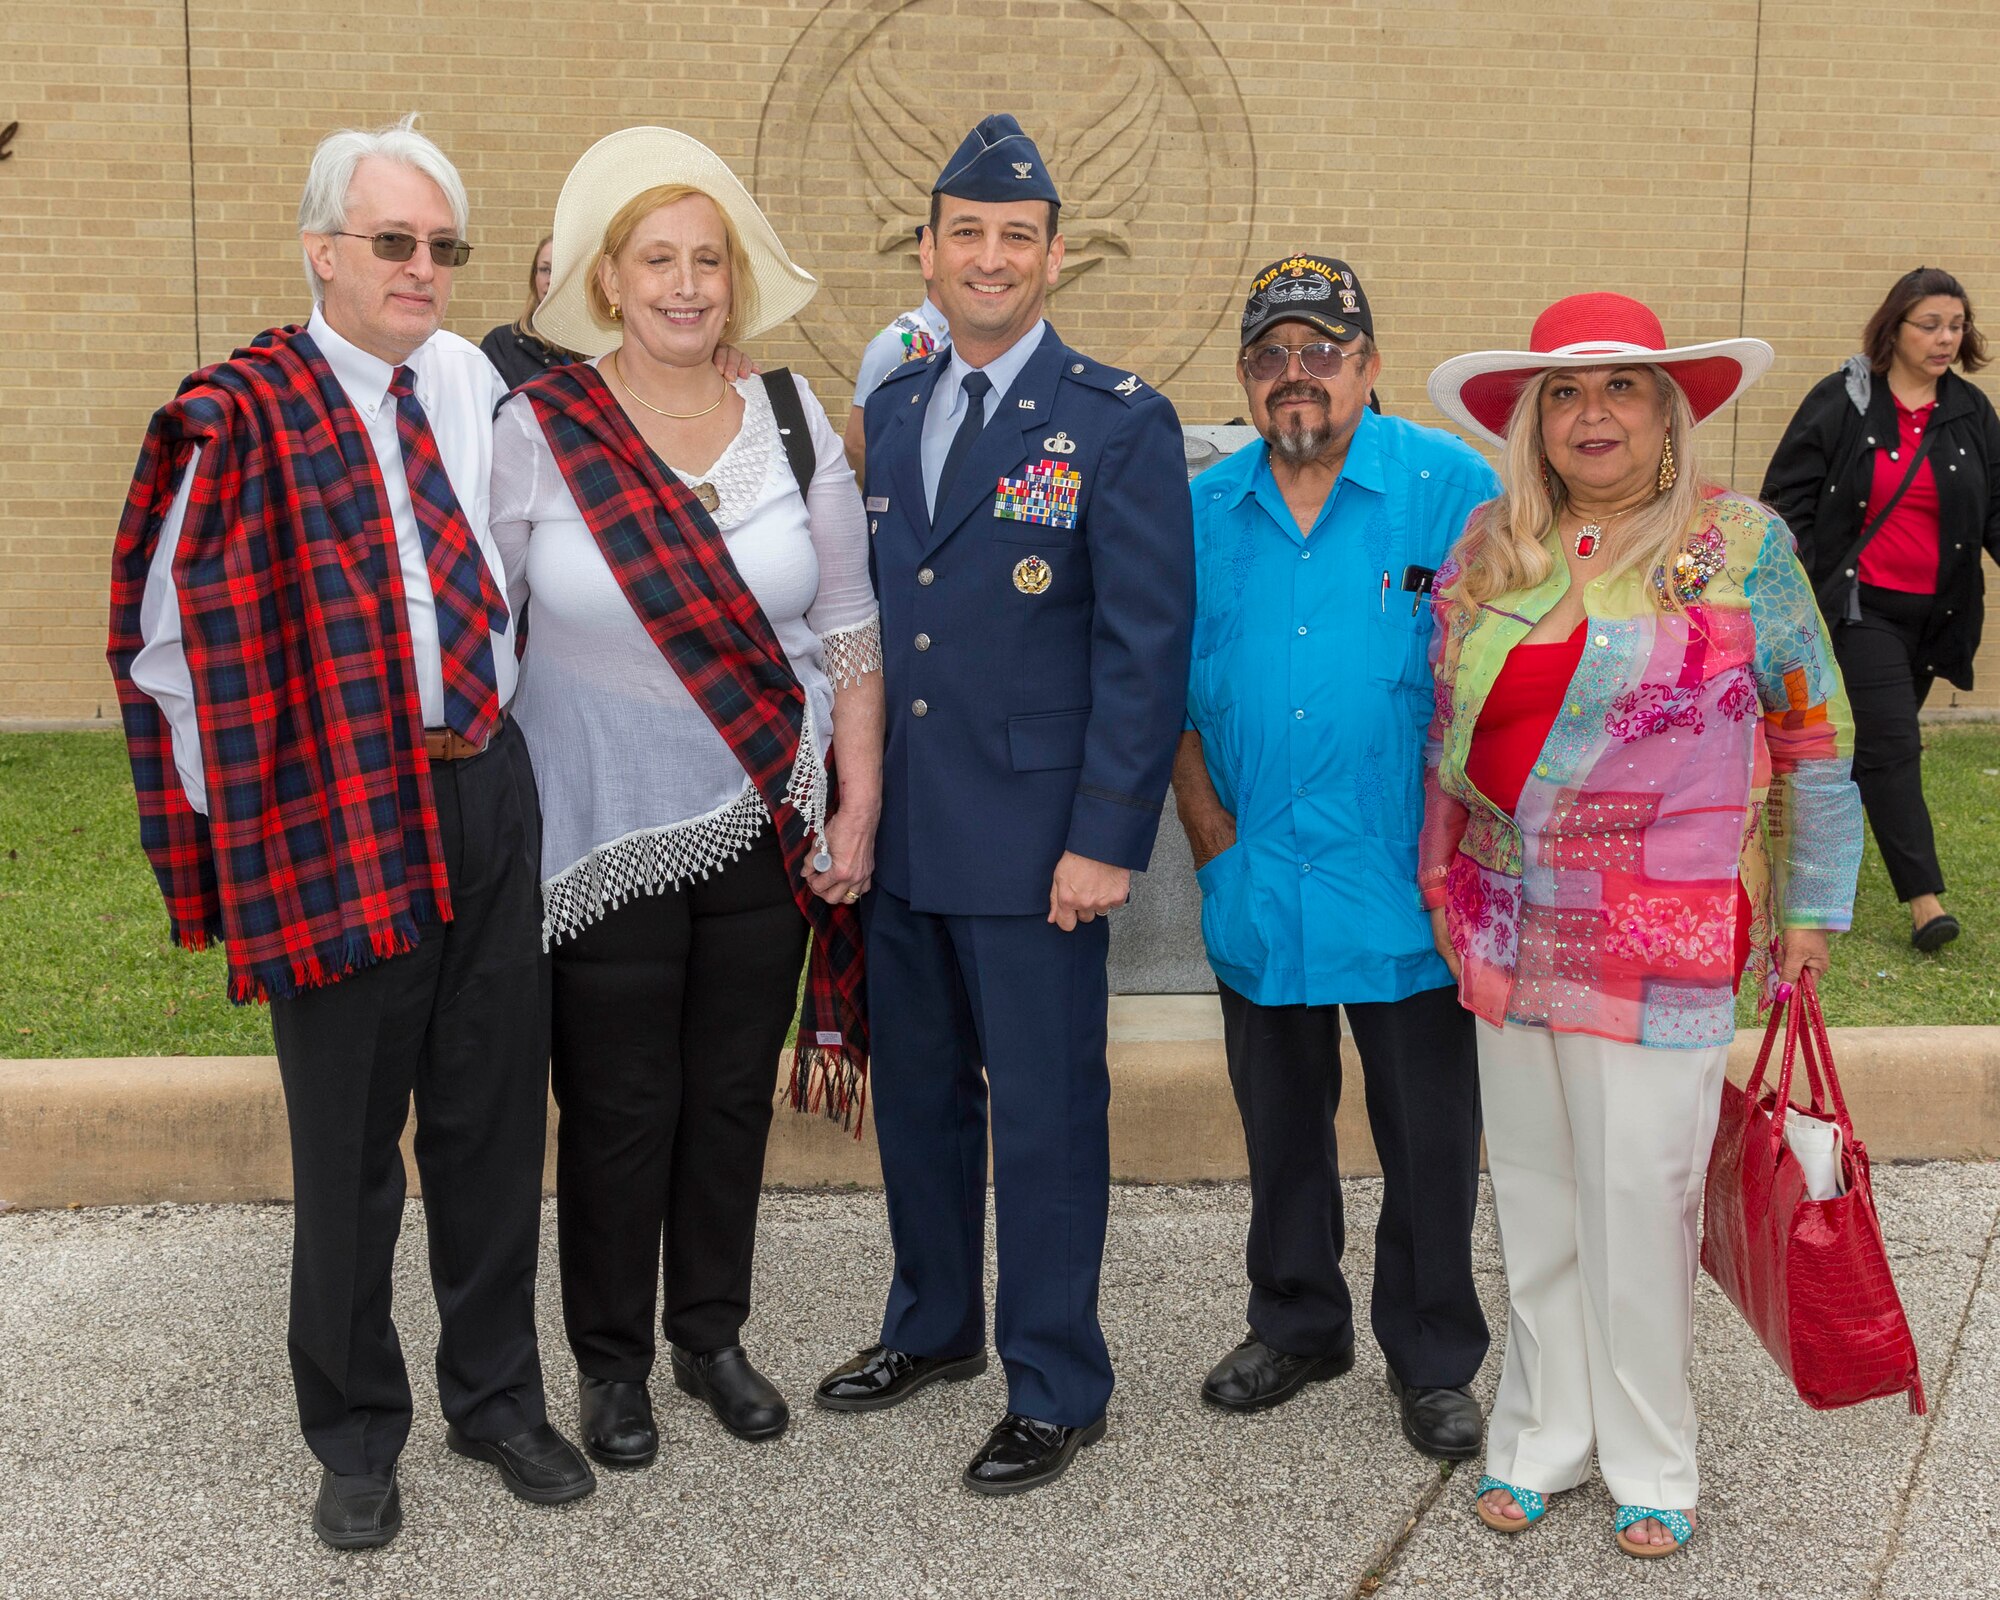 David Lackland (Left) and his wife Eileen take a group photo at Joint Base San Antonio-Lackland, Texas after a basic military training graduation ceremony April 20, 2018. David is the cousin of Brig. Gen. Frank D. Lackland, the namesake of JBSA-Lackland. Today is the first time David and Eileen have viewed a BMT graduation. (U.S. Air Force photo by Ismael Ortega / Released)